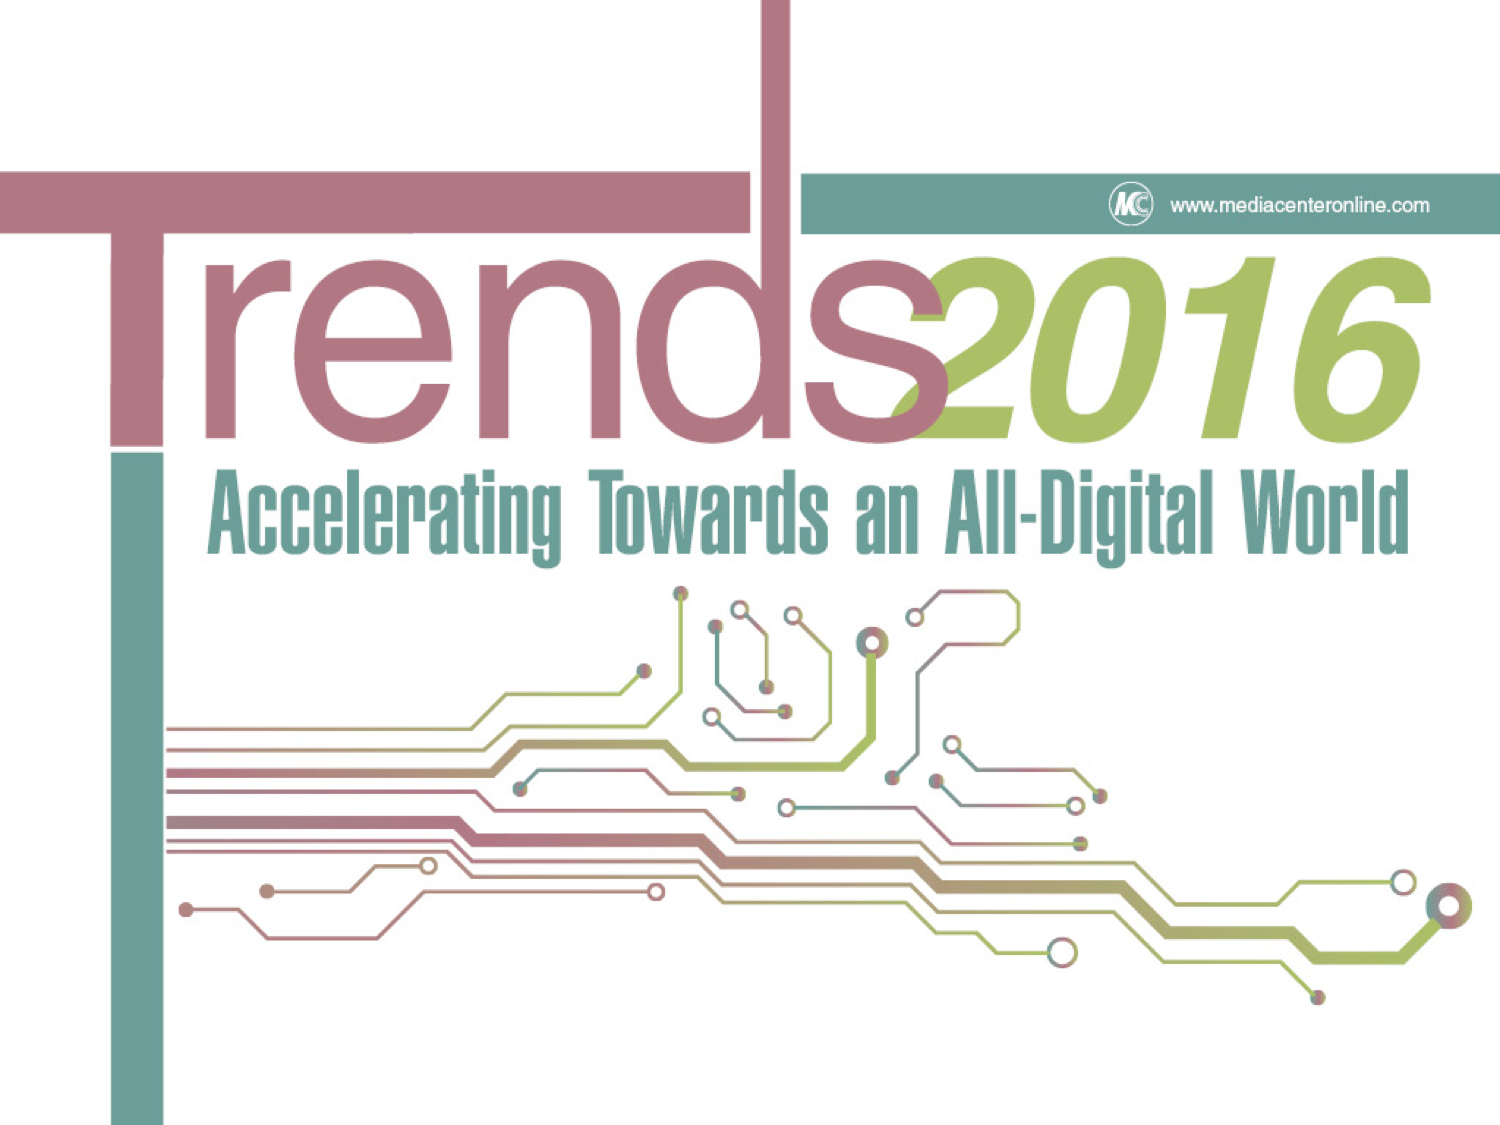 TRENDS 2016: ACCELERATING TOWARDS AN ALL-DIGITAL WORLD